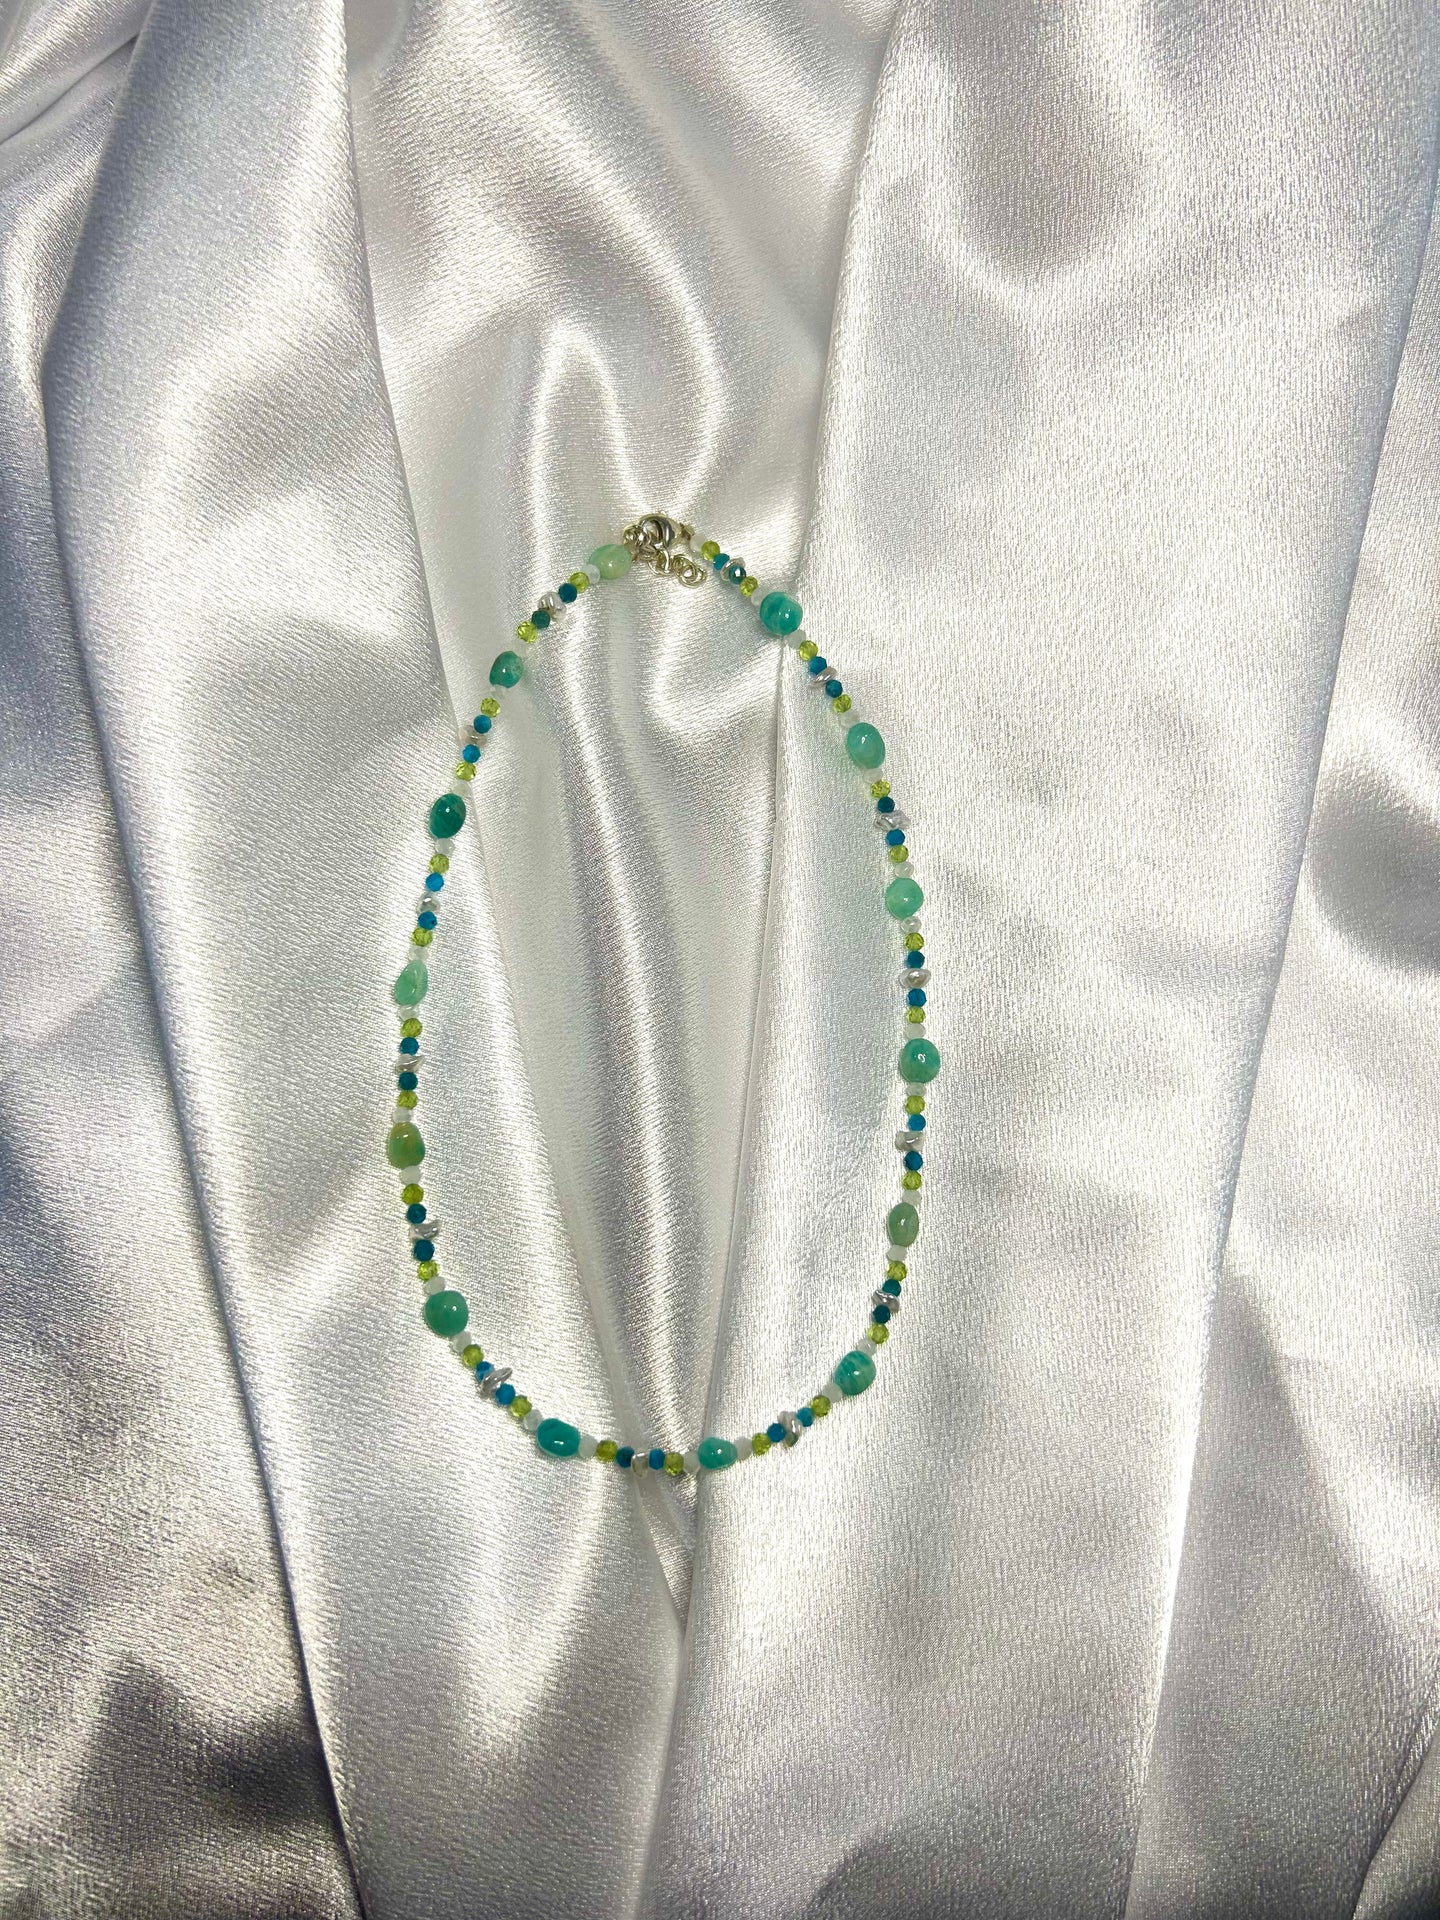 Blues and greens necklace